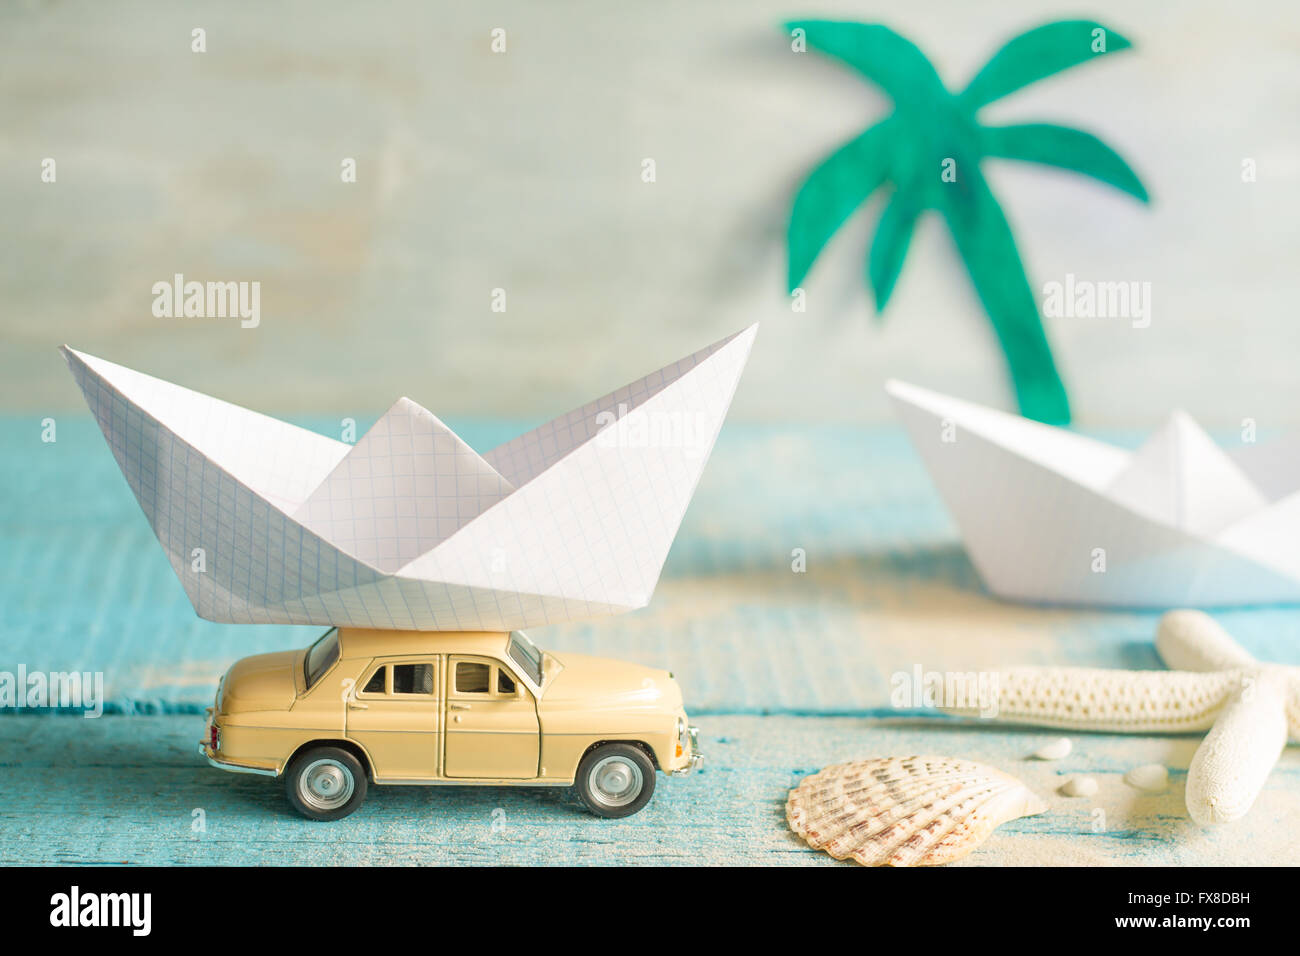 Holiday background unique abstract concept with origami boat Stock Photo